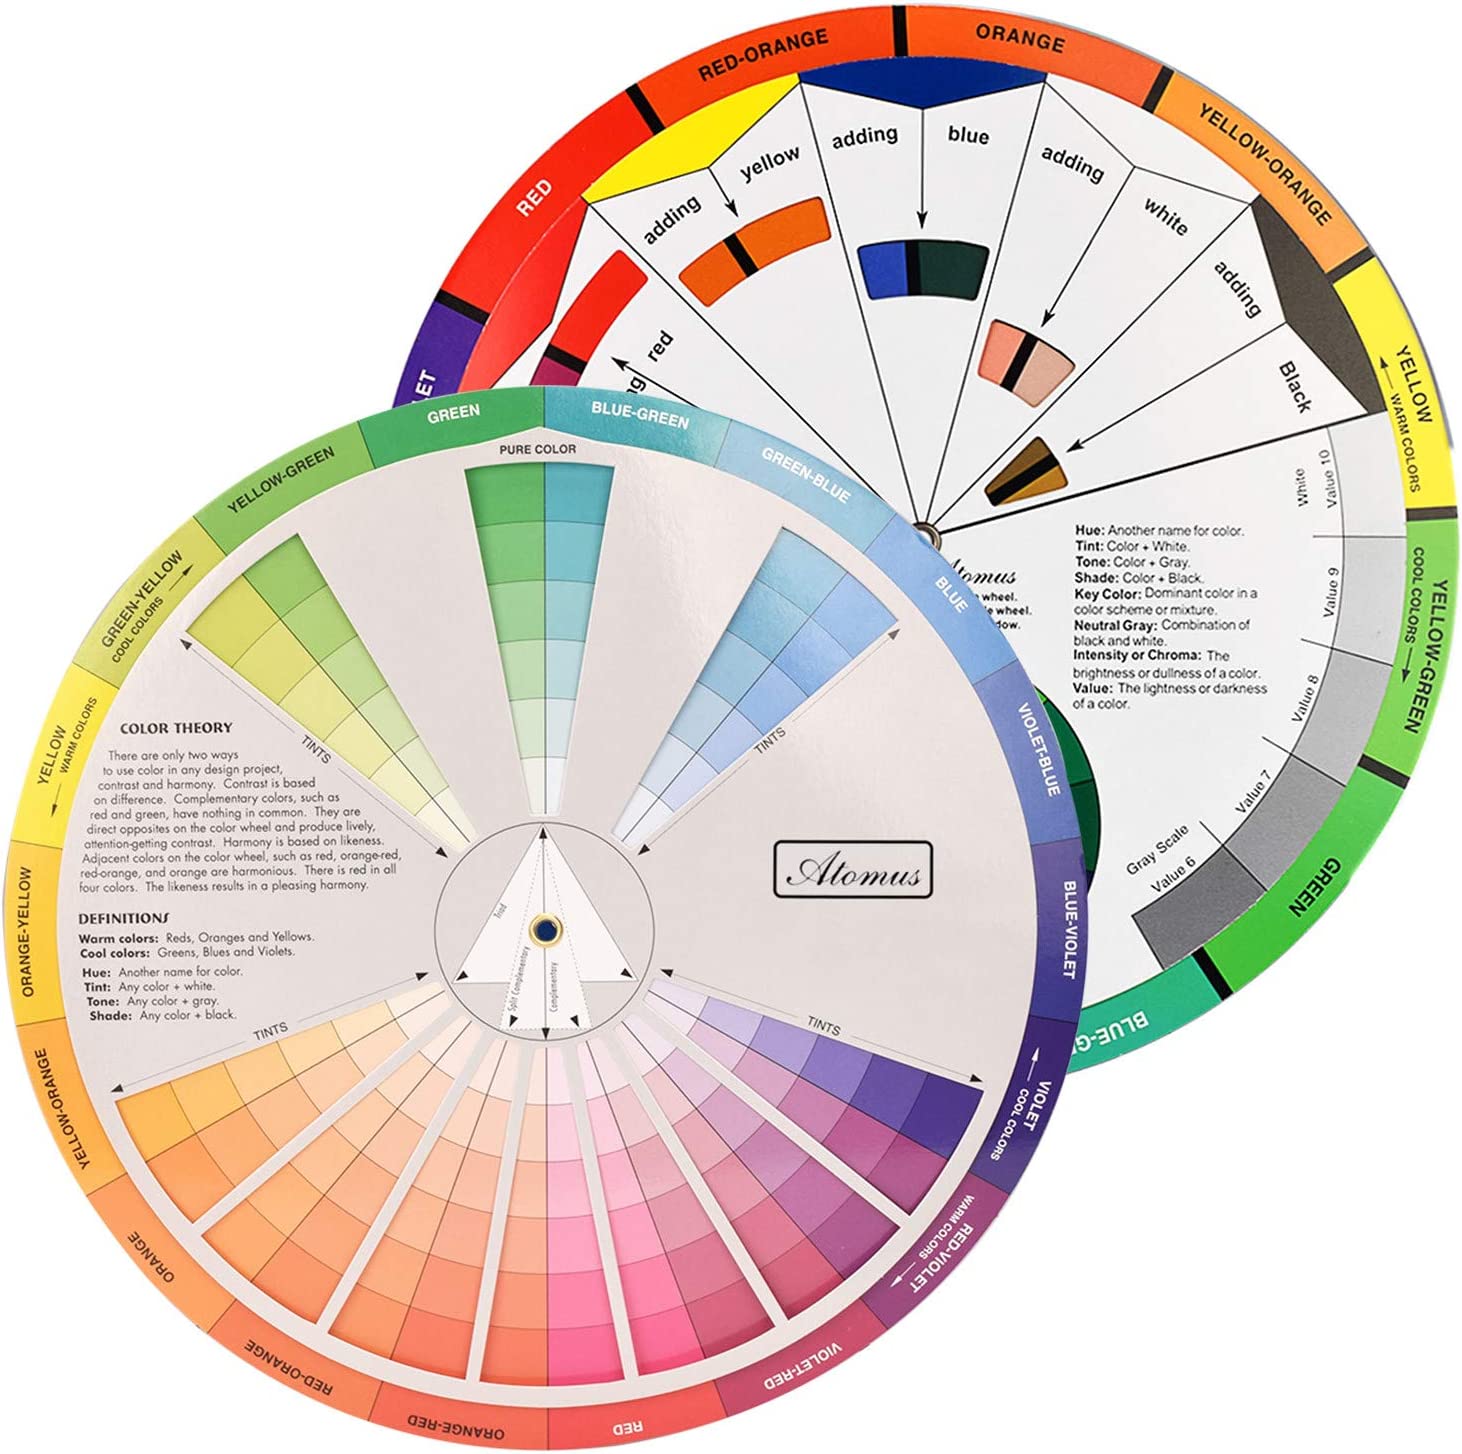 JimKing Creative Color Wheel, Paint Mixing Learning Guide, Art Class Teaching Tool for Makeup Blending Board Color Mixed, 9.25inch 2 piceces